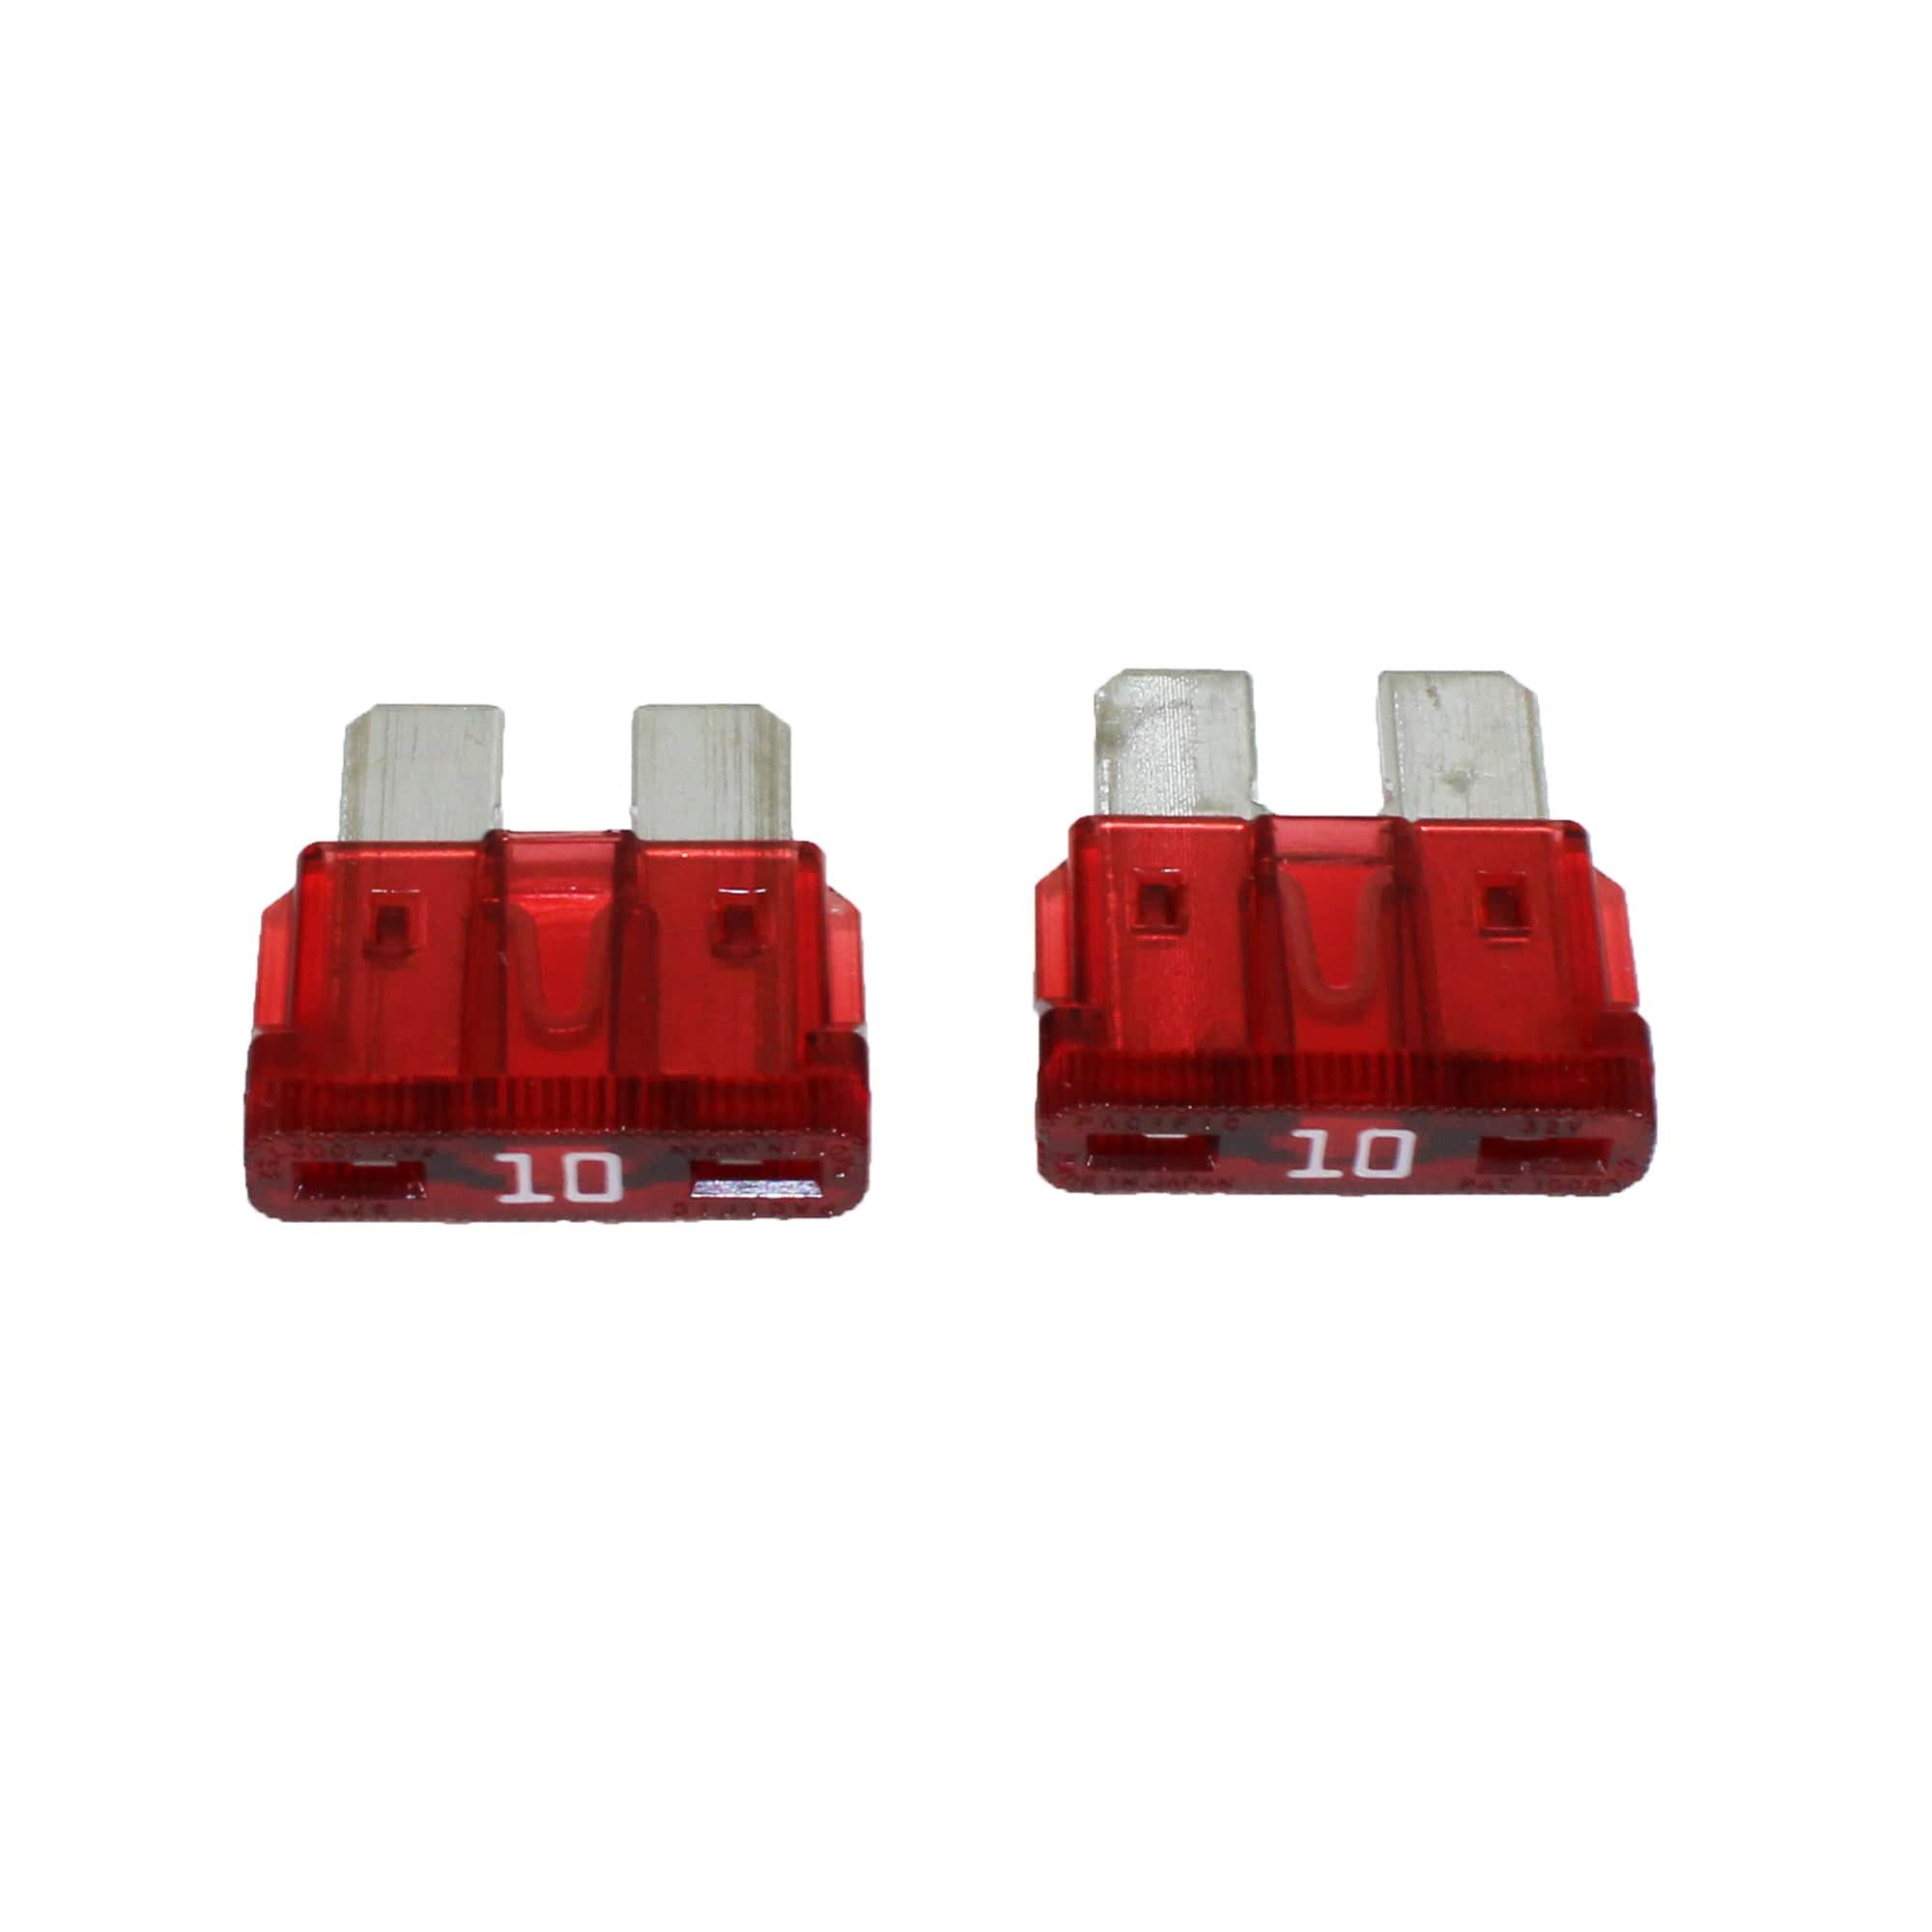 Blue Sea Systems 5241-BSS 10A ATO/ATC Fuse - 2 Pack